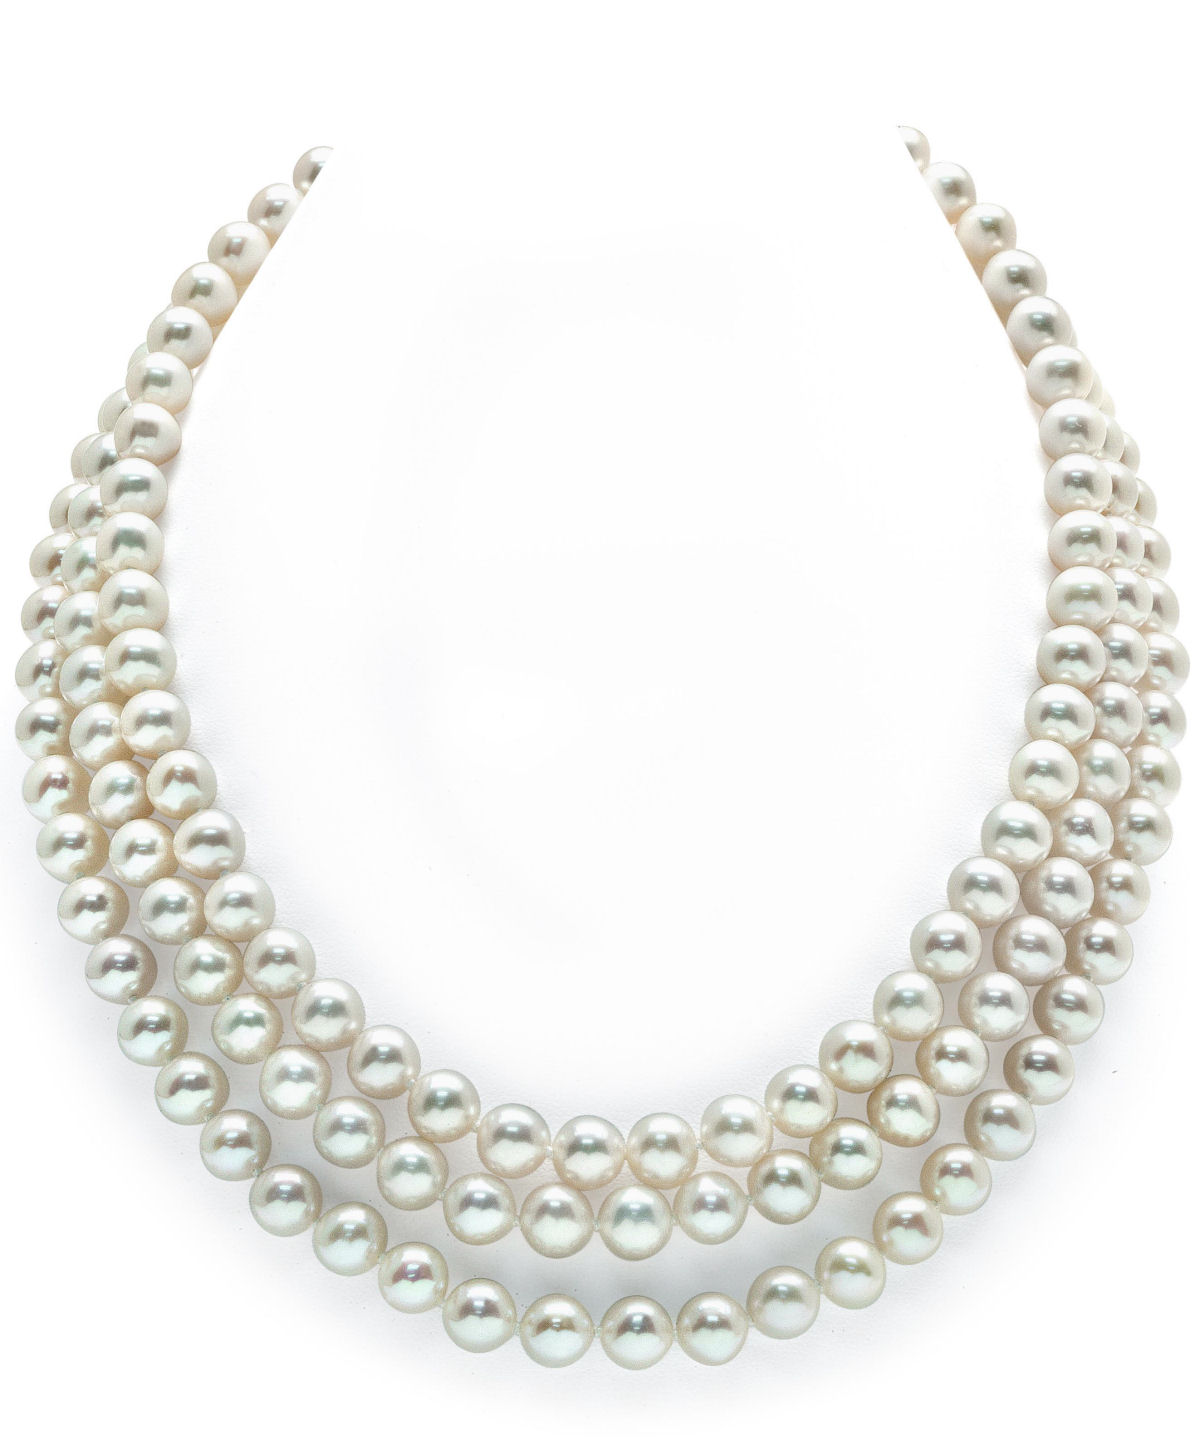 Buy 7 8mm Triple Strand White Freshwater Pearl Necklace For 449 The